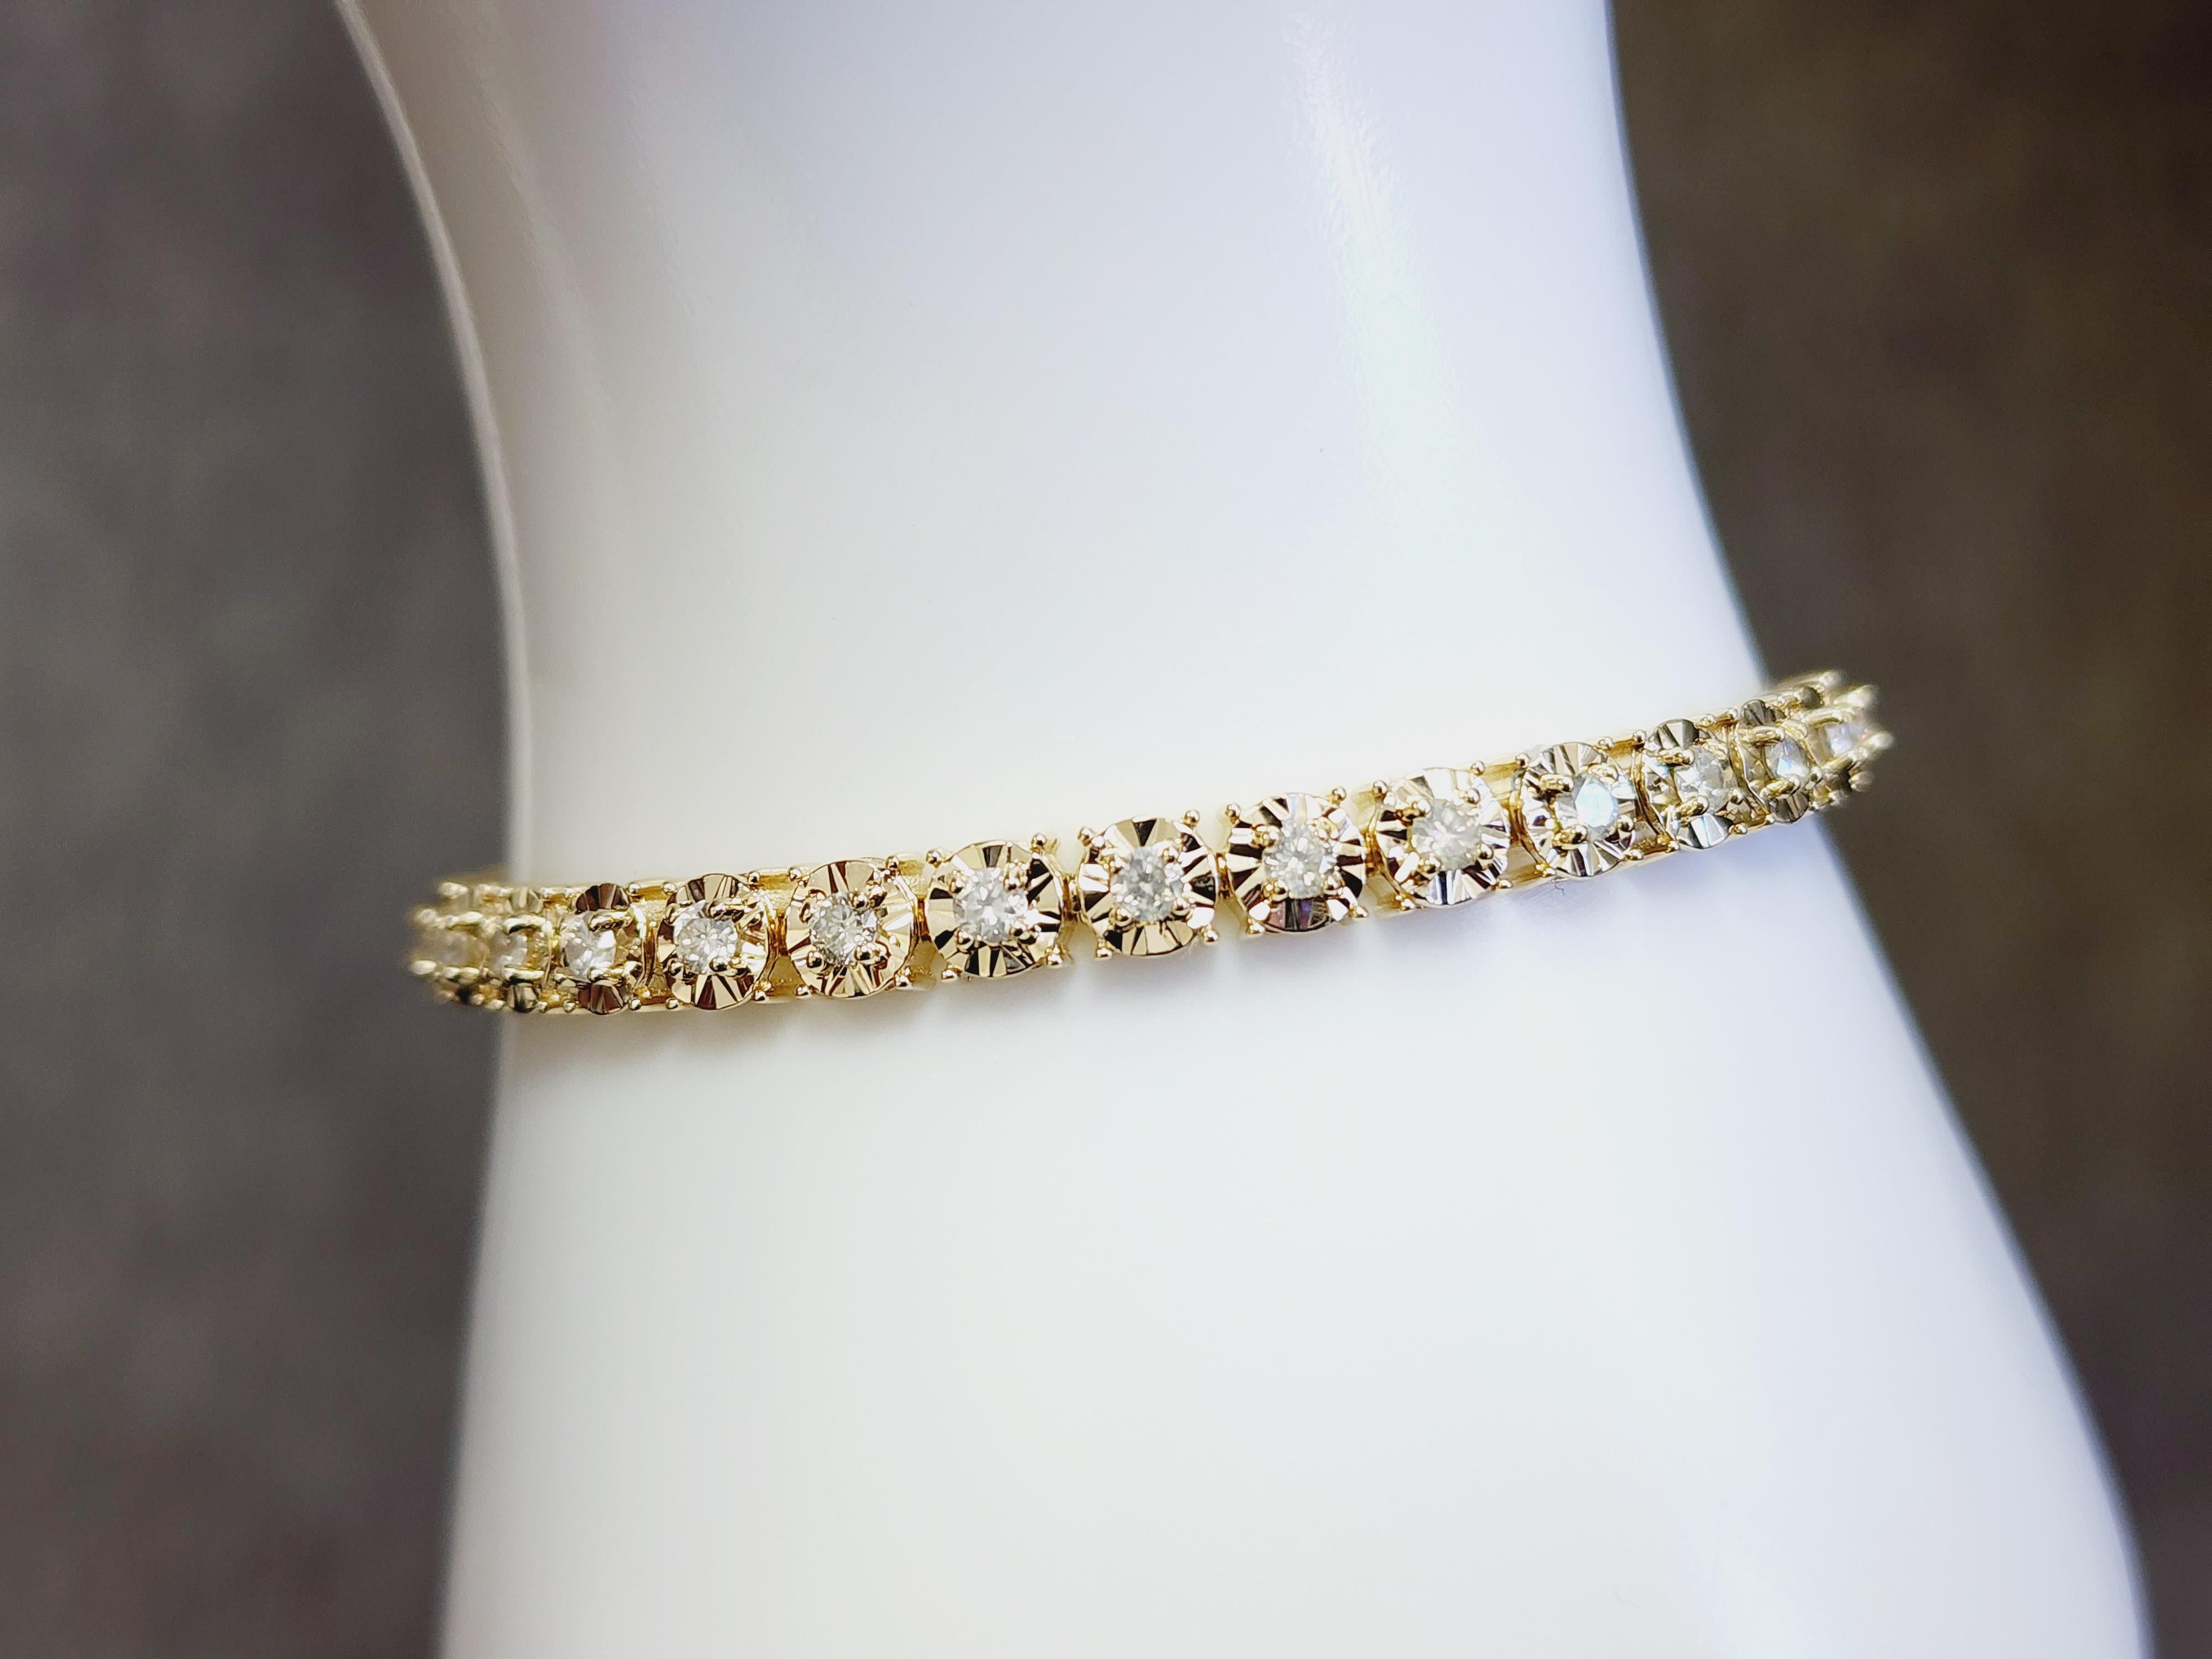 Natural Diamonds Approx. 2.55 carat total weight
Average Display Color: I, Clarity: SI
Metal Type: 4 Prong 14 karat yellow gold miracle Illusion setting
Length 7 inch